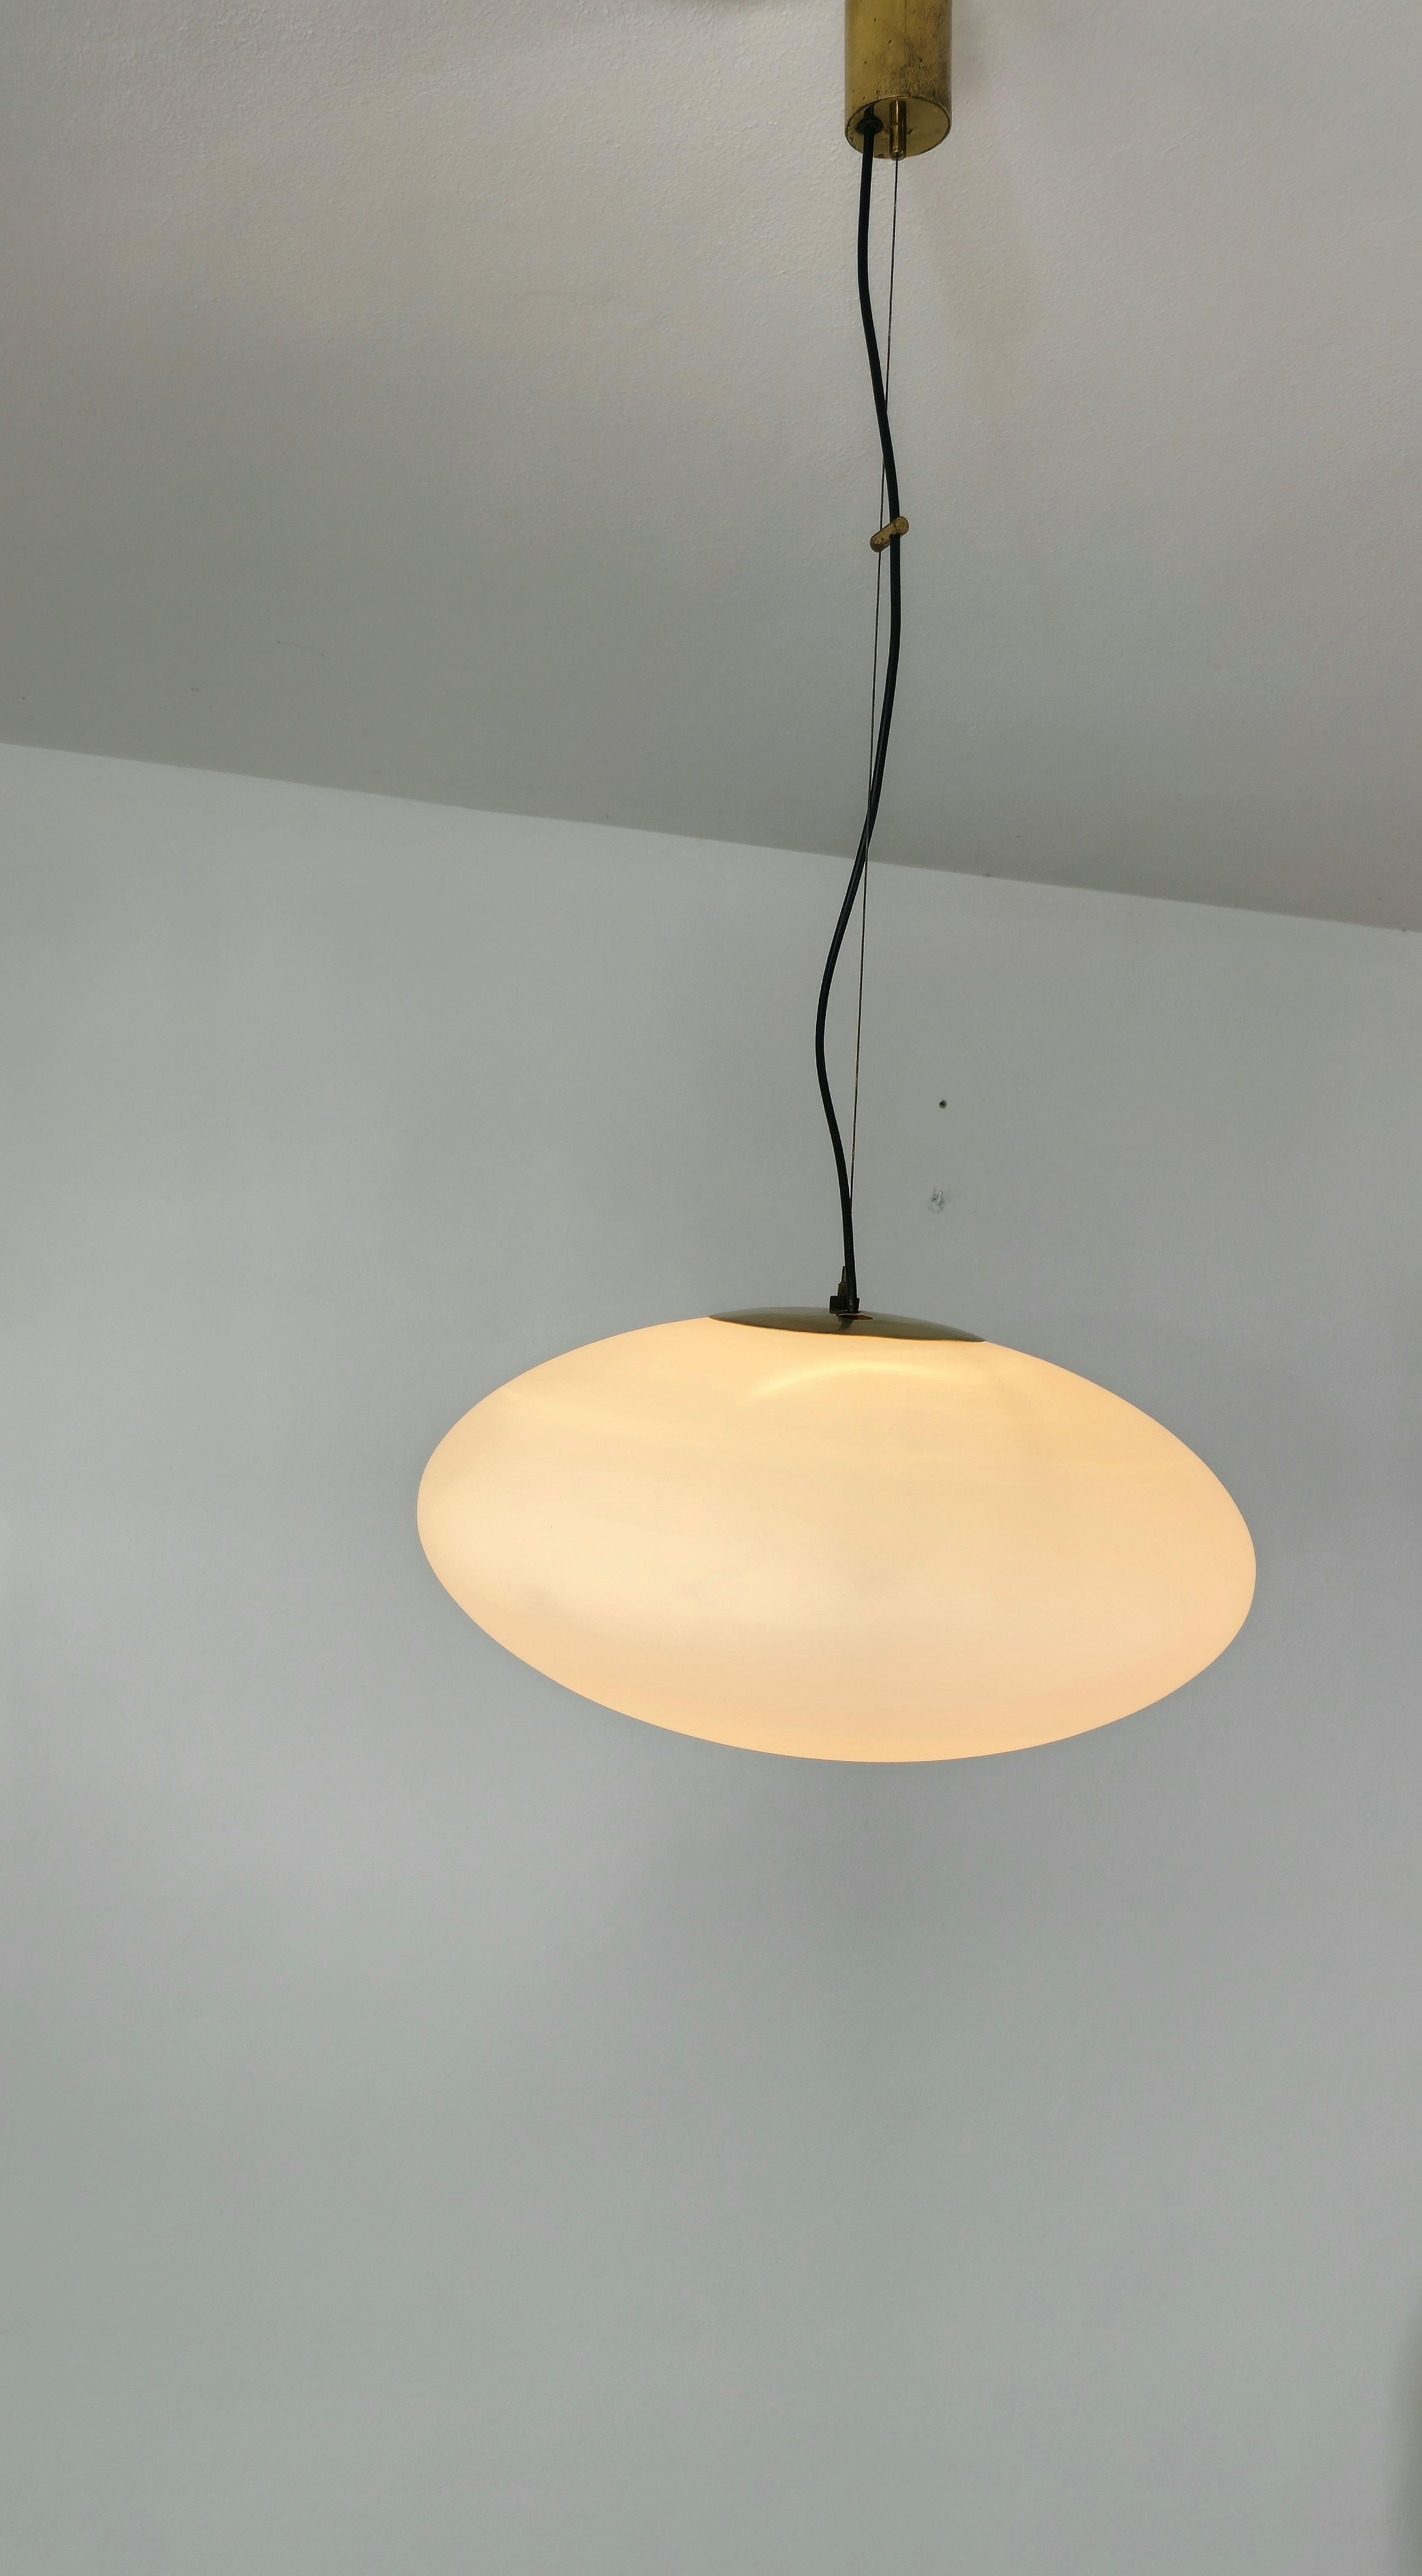 Stilnovo model 1104 suspension lamp has an ellipsoid-shaped opal glass diffuser. The glass is supported by a brass accessory which allows the glass to change its slope or balance according to one's taste. All supported by a steel wire with a brass